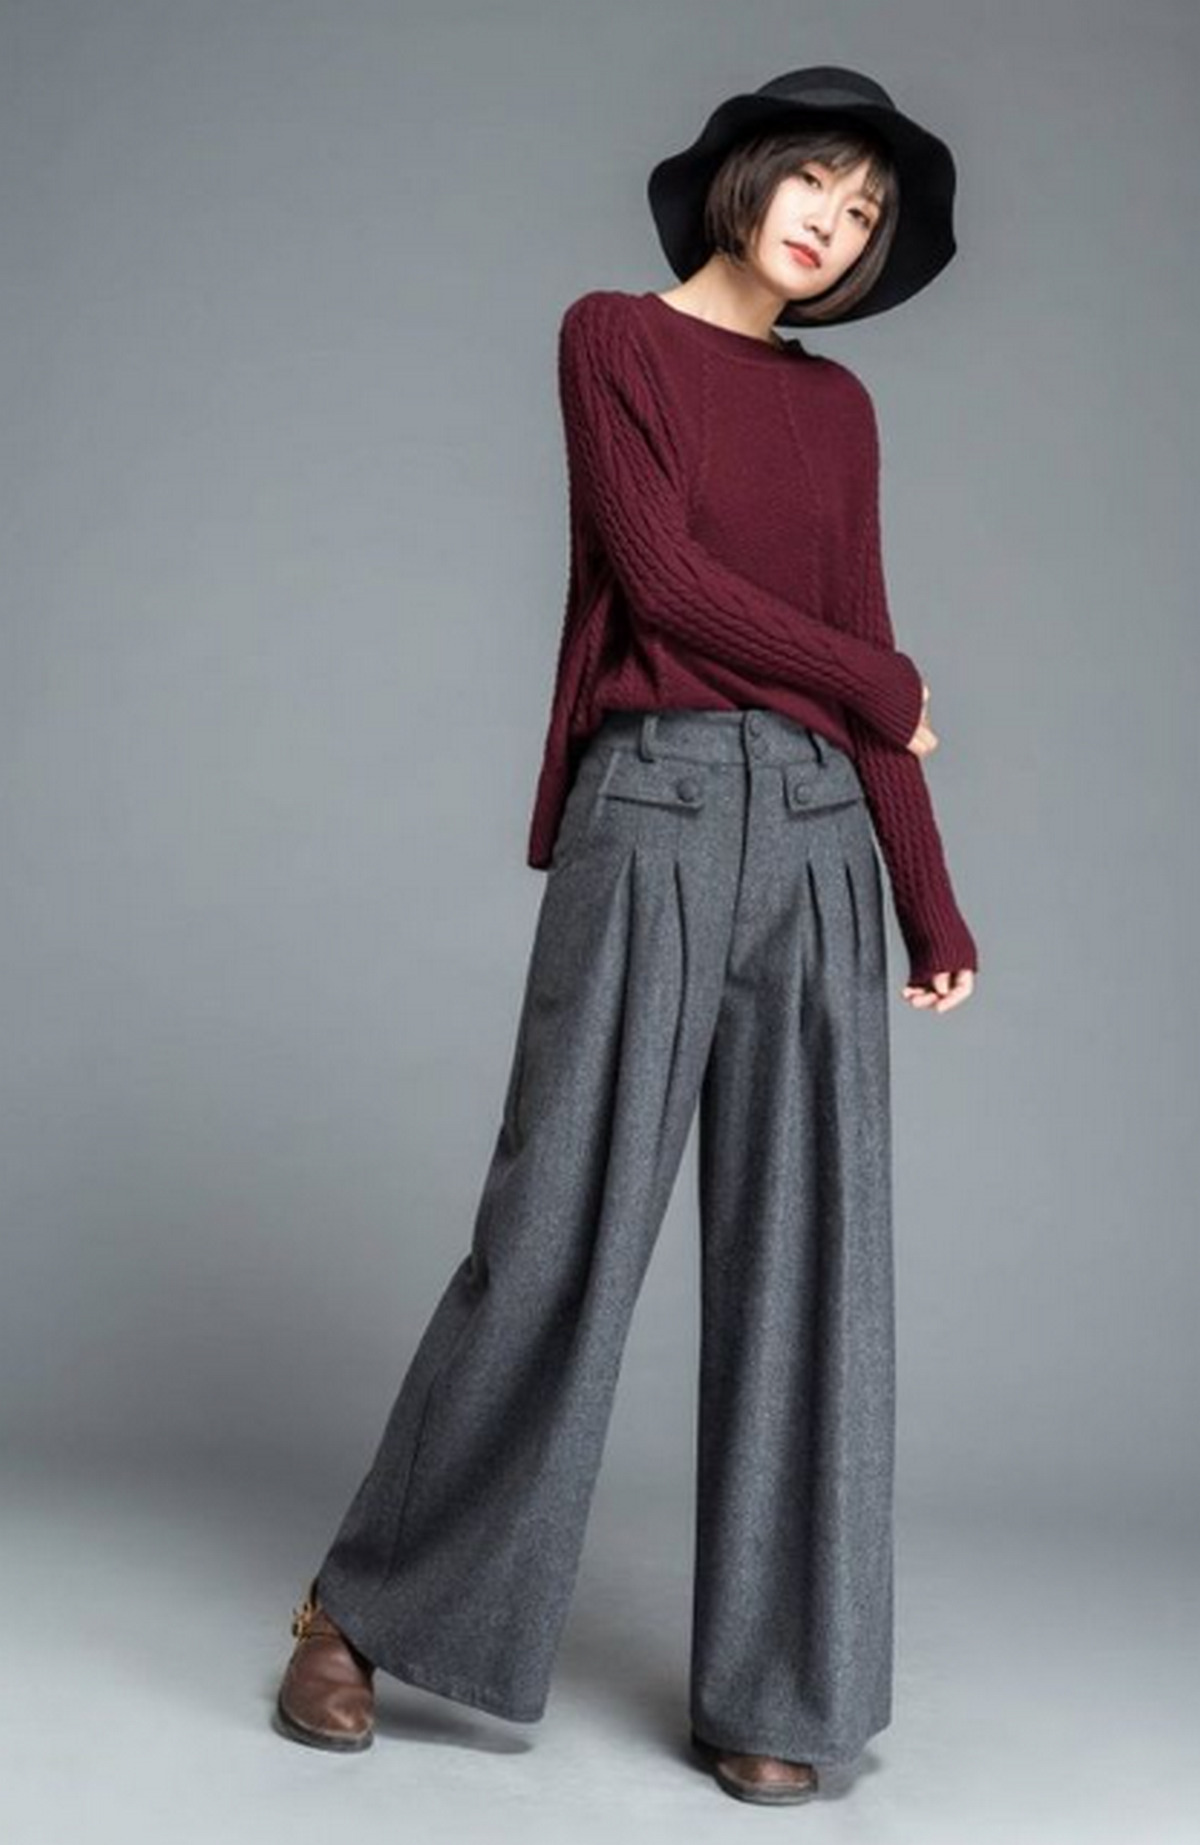 Red Sweater With Maxi Gray Pants For Women